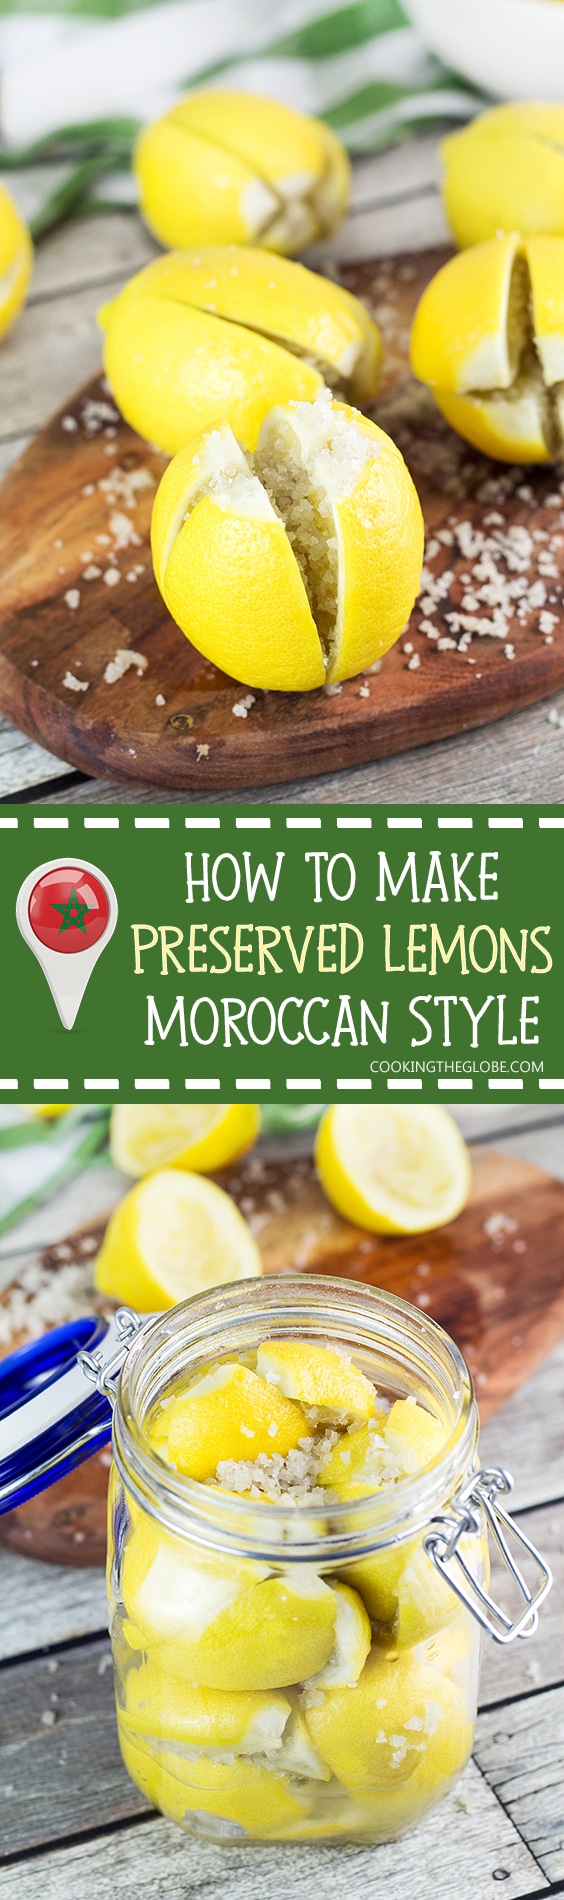 Moroccan Preserved Lemons are a must in every kitchen pantry. They require only 2 ingredients to make and can be used in an array of dishes! | cookingtheglobe.com